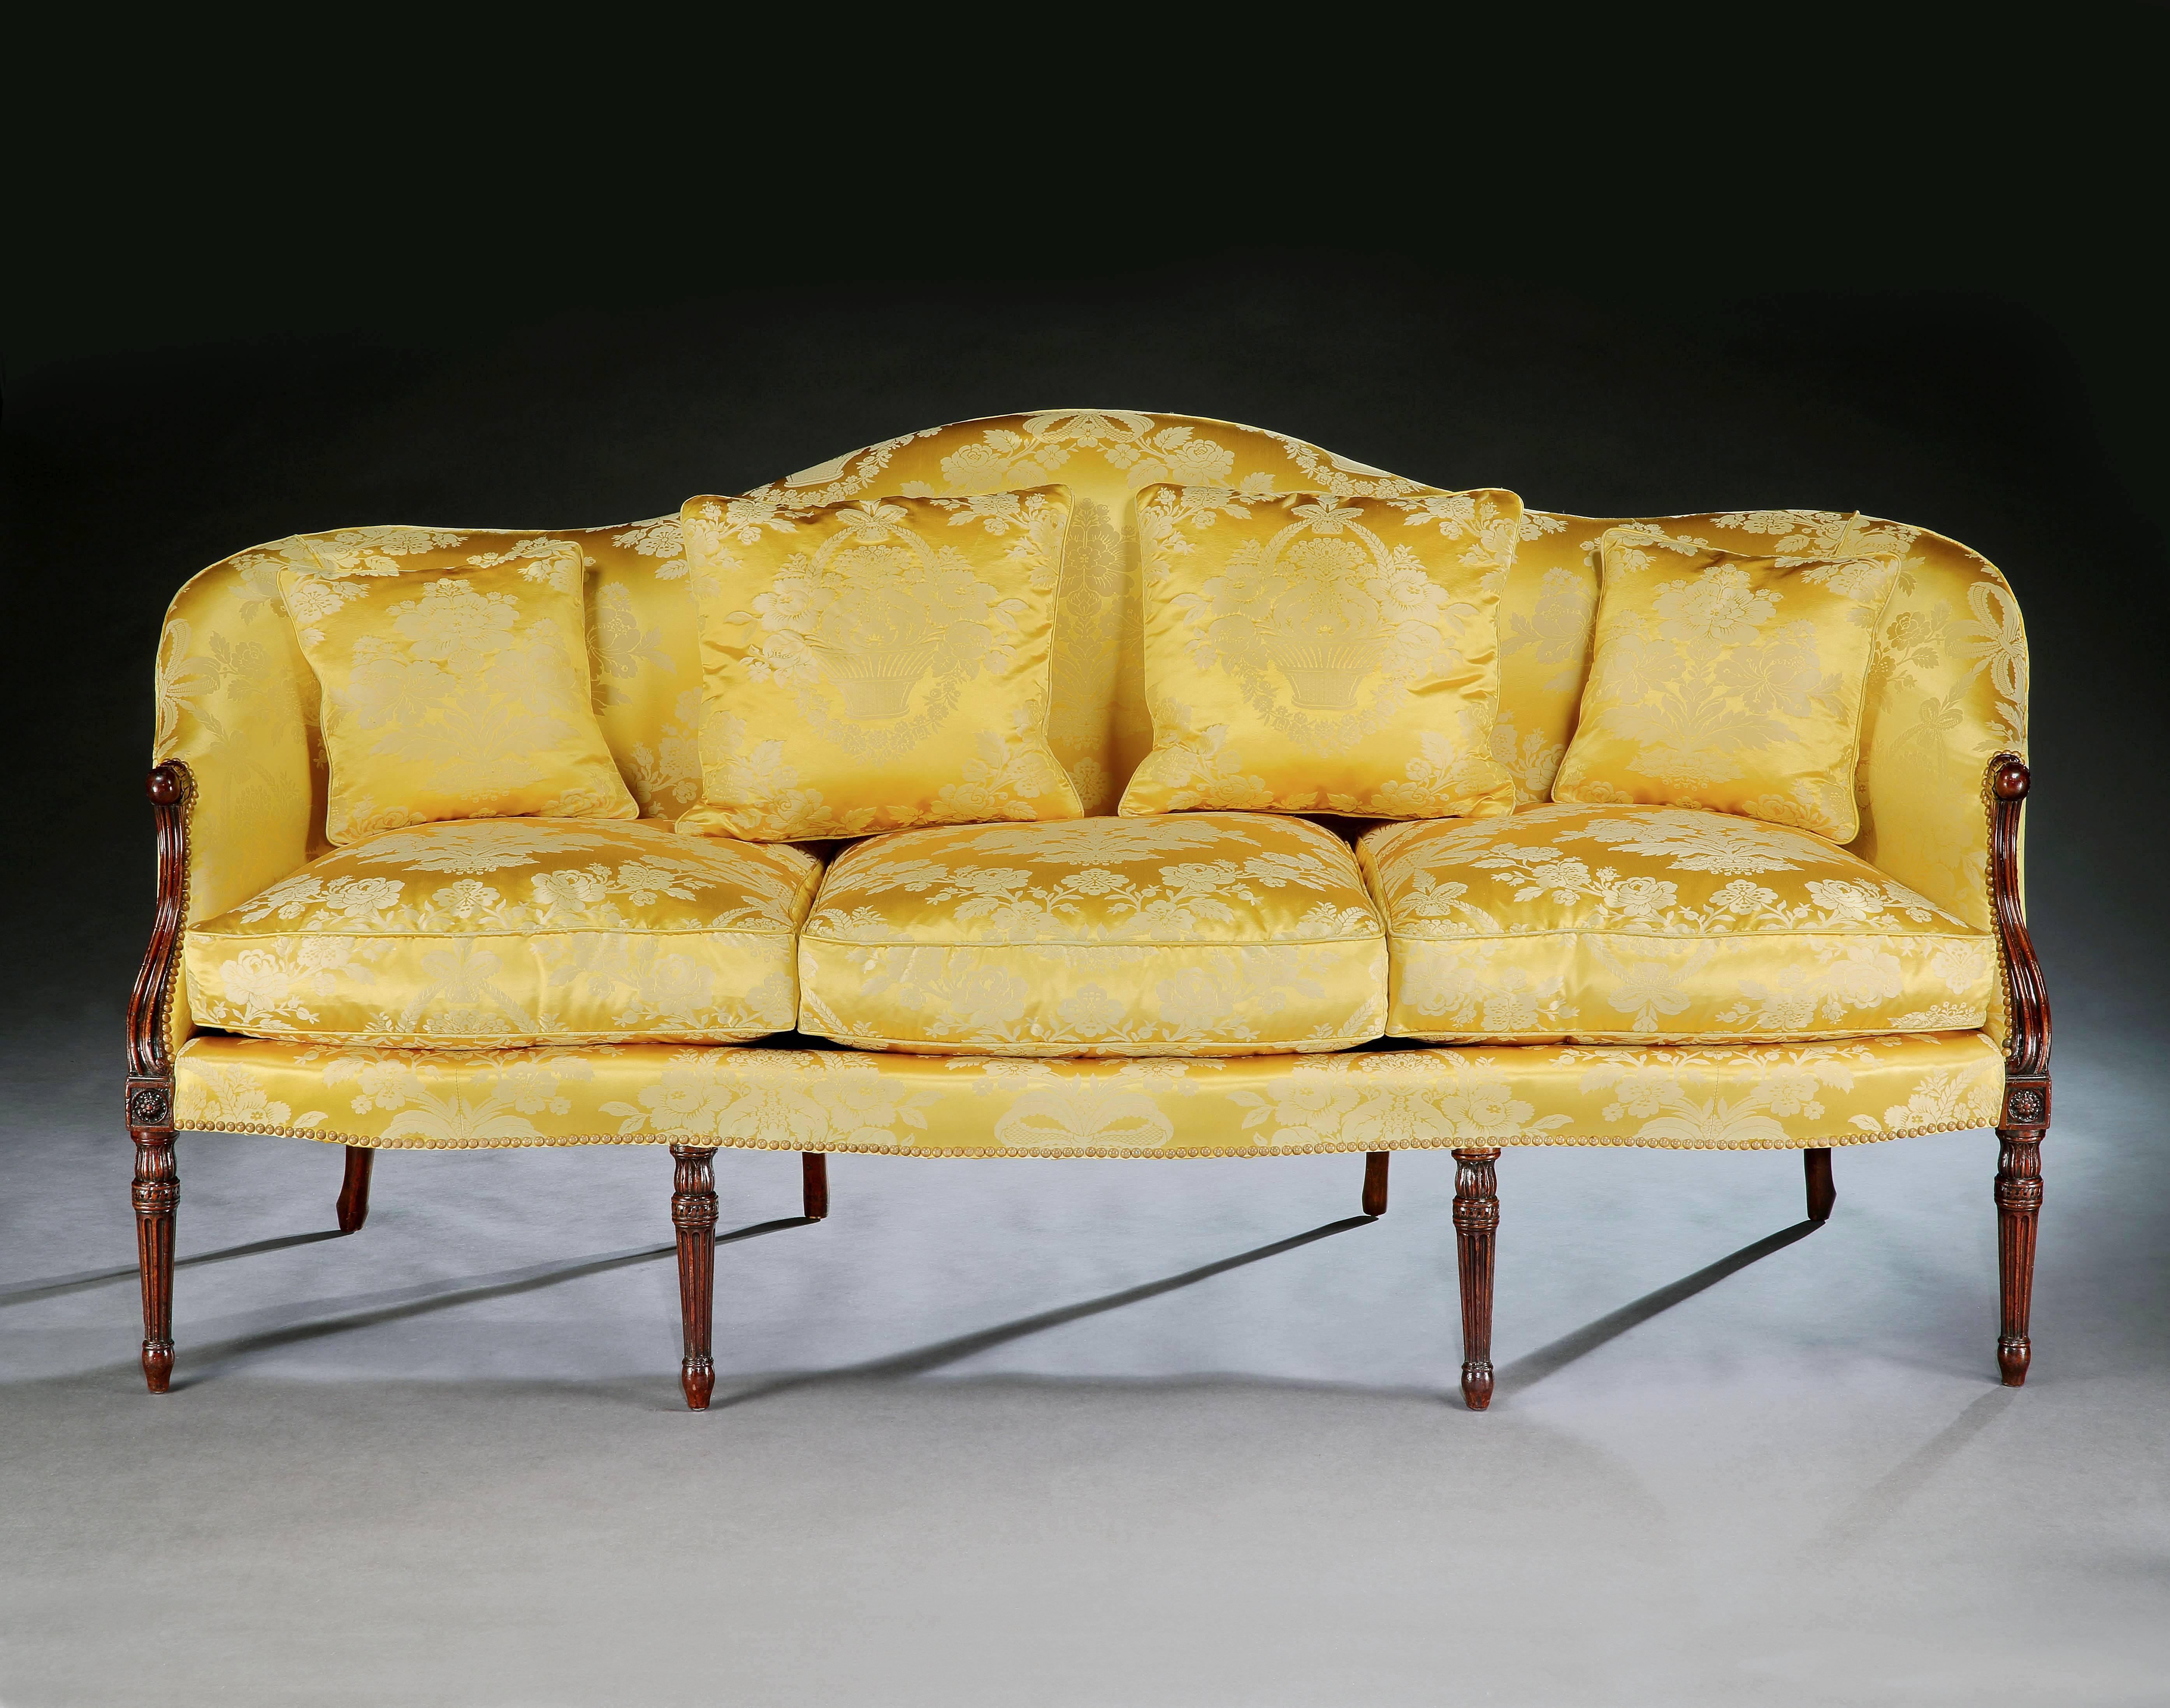 A particularly elegant and finely carved George III three-seat mahogany settee, the serpentine shaped back central to carved end supports, terminating in carved and fluted legs headed by paterae. The settee and cushions covered in a yellow and gold